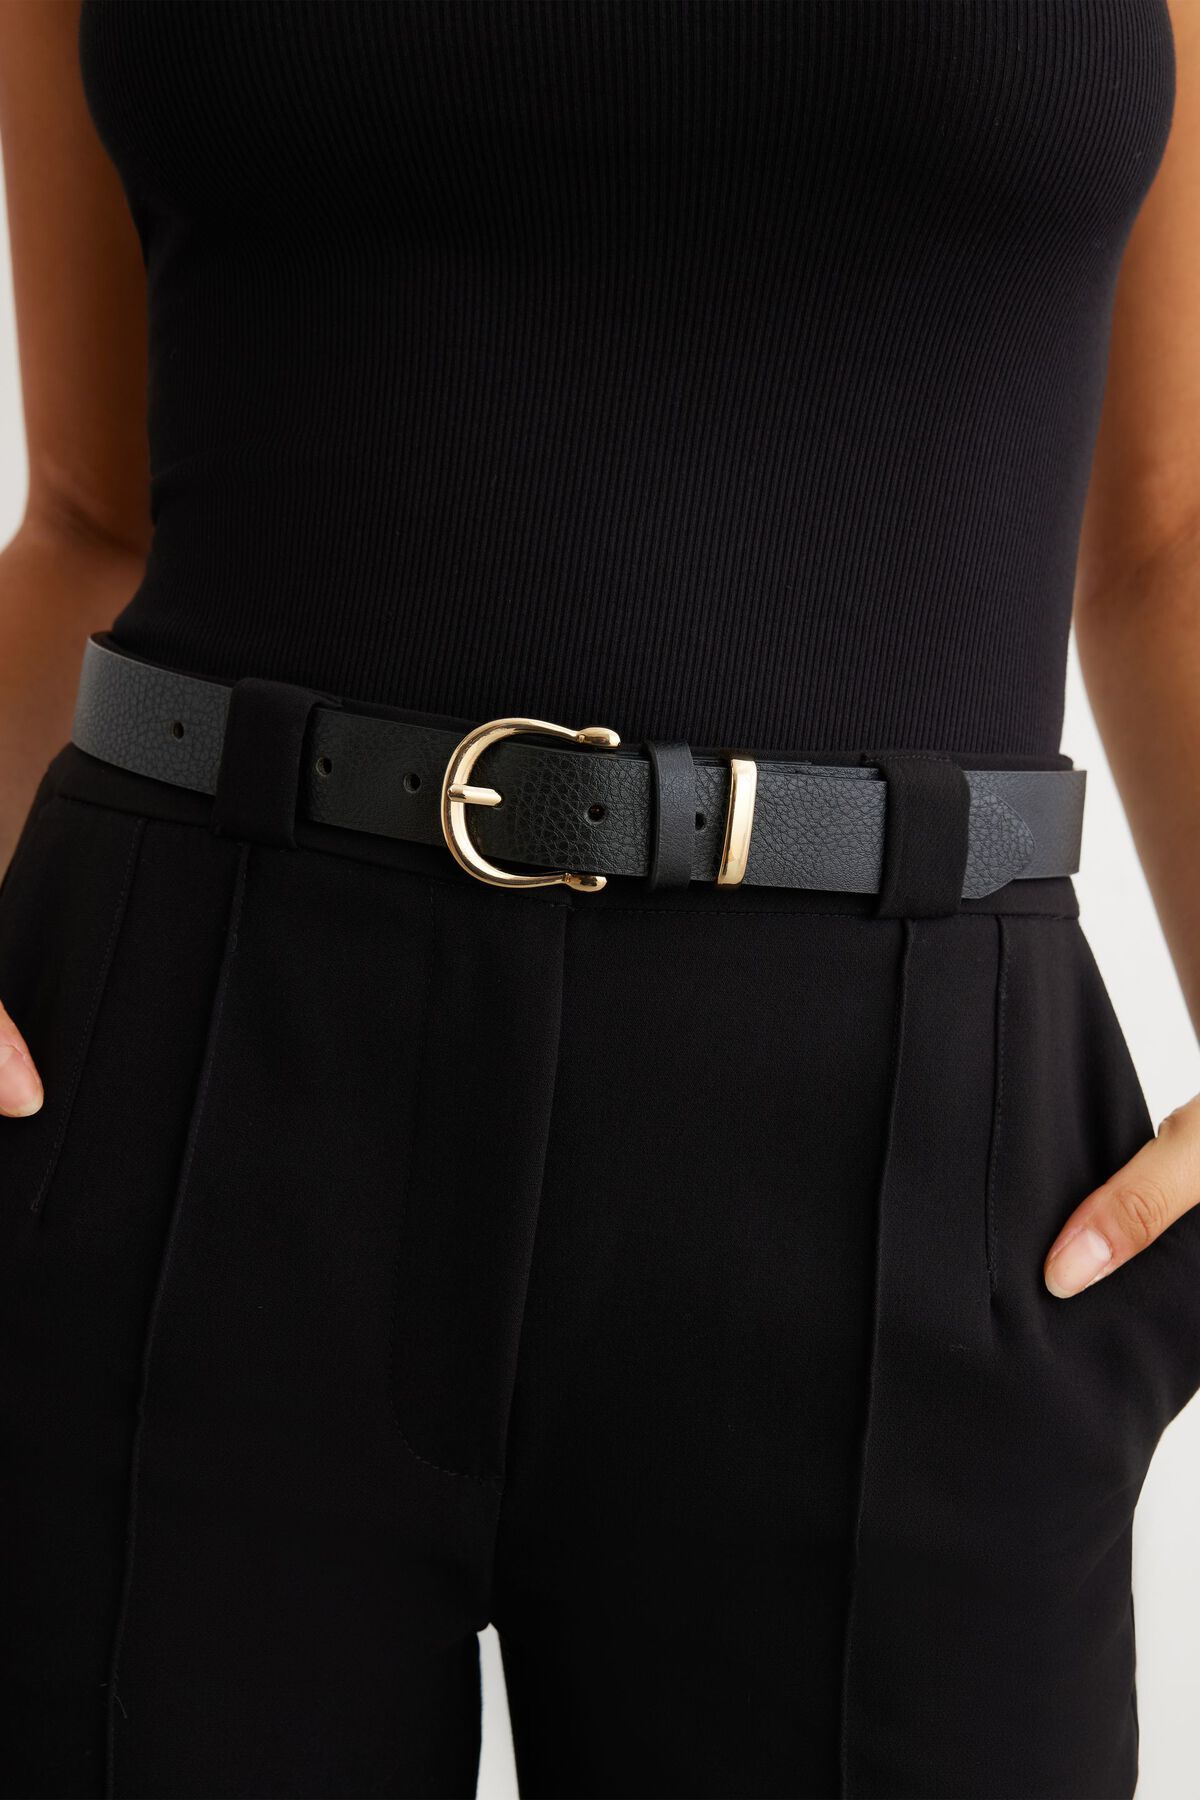 Classic Sophistication: Finding the Right Formal Belts